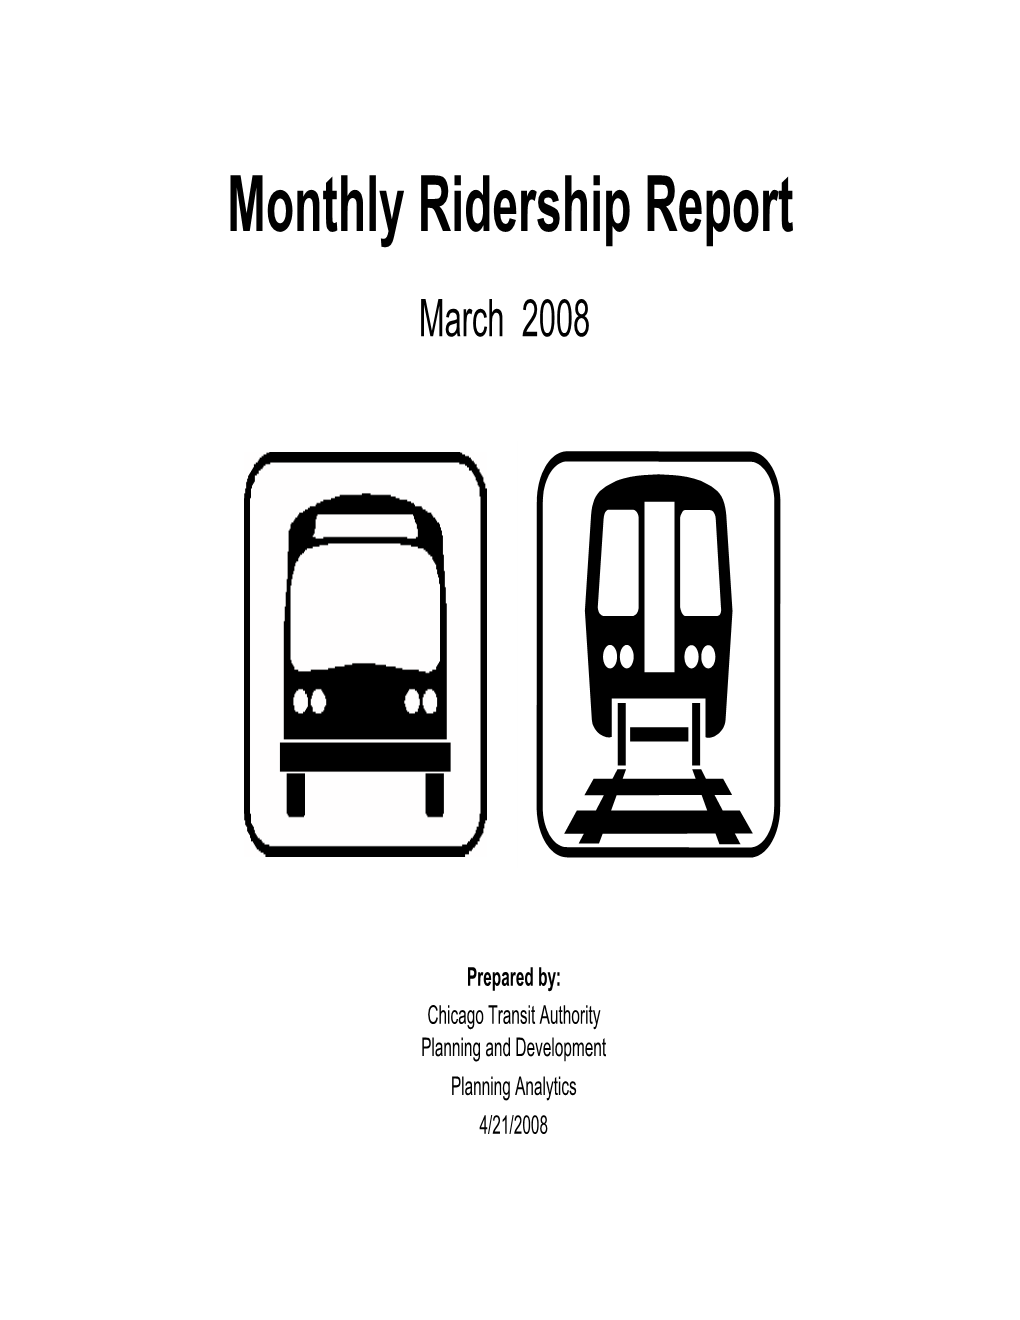 Monthly Ridership Report March 2008